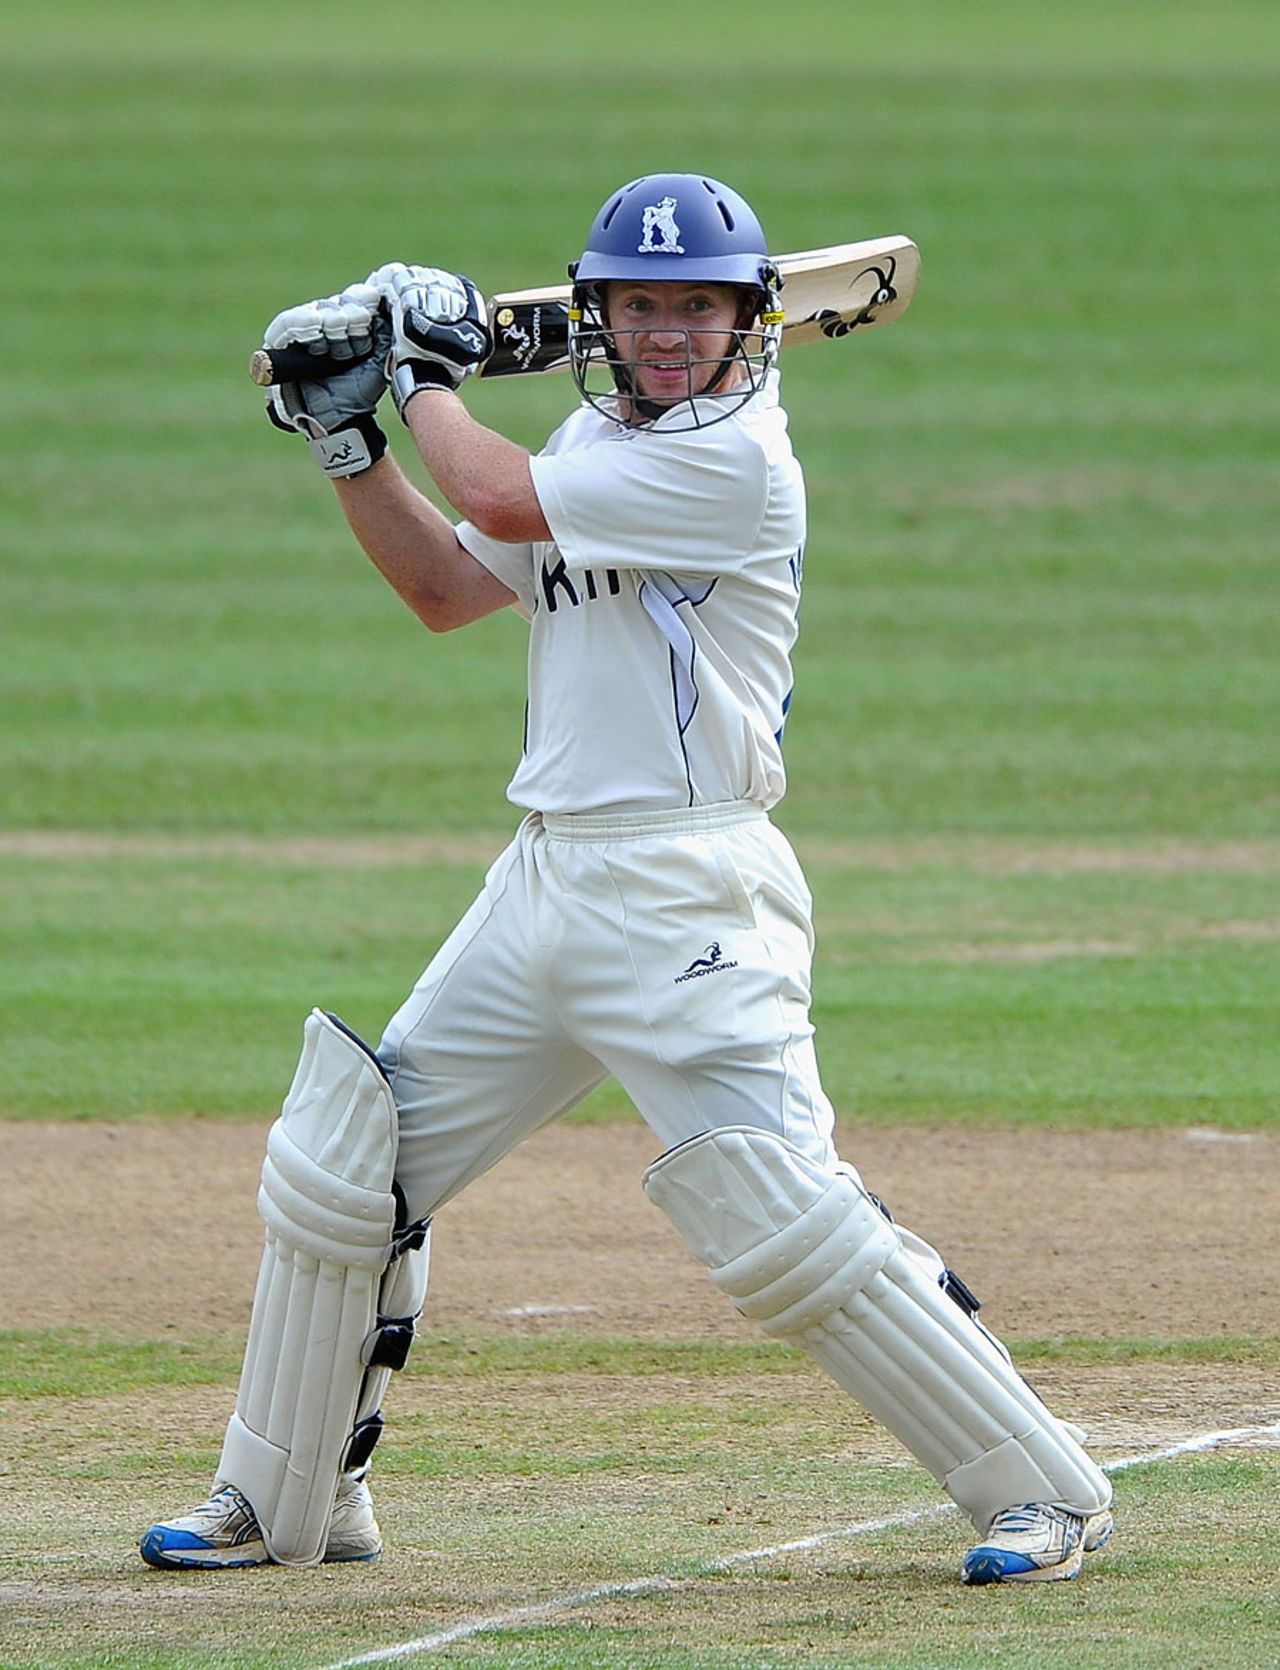 Ian Westwood's century helped put Warwickshire in a good position, Warwickshire v Nottinghamshire, County Championship Division One, 1st day, Edgbaston, September 7 2011